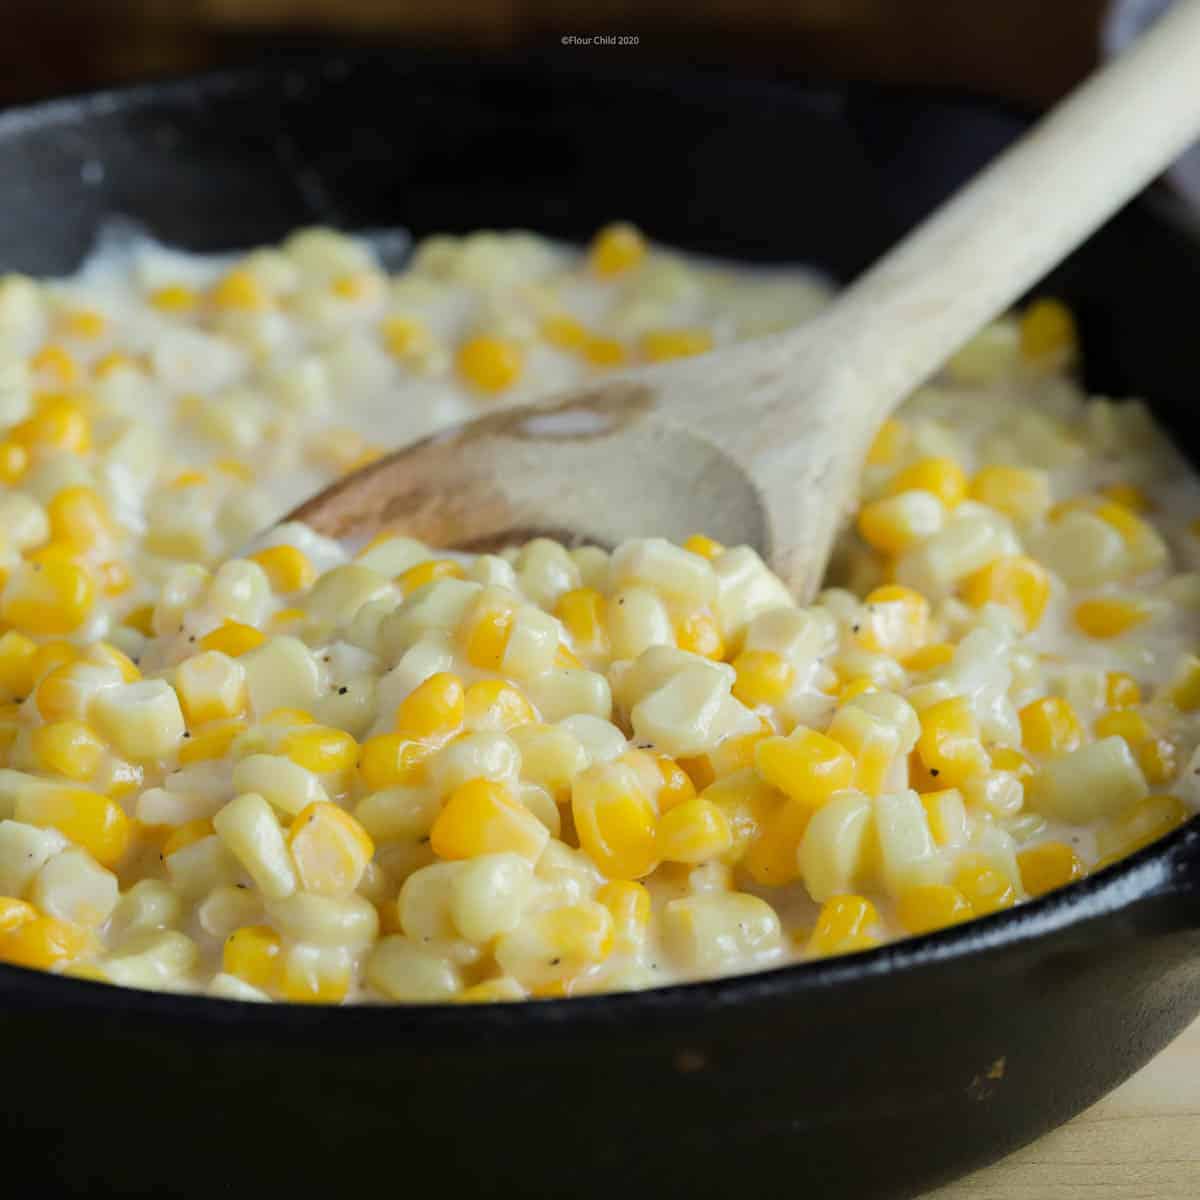 This southern sweet creamed corn features both yellow and white corn kernels for variation in the dish.